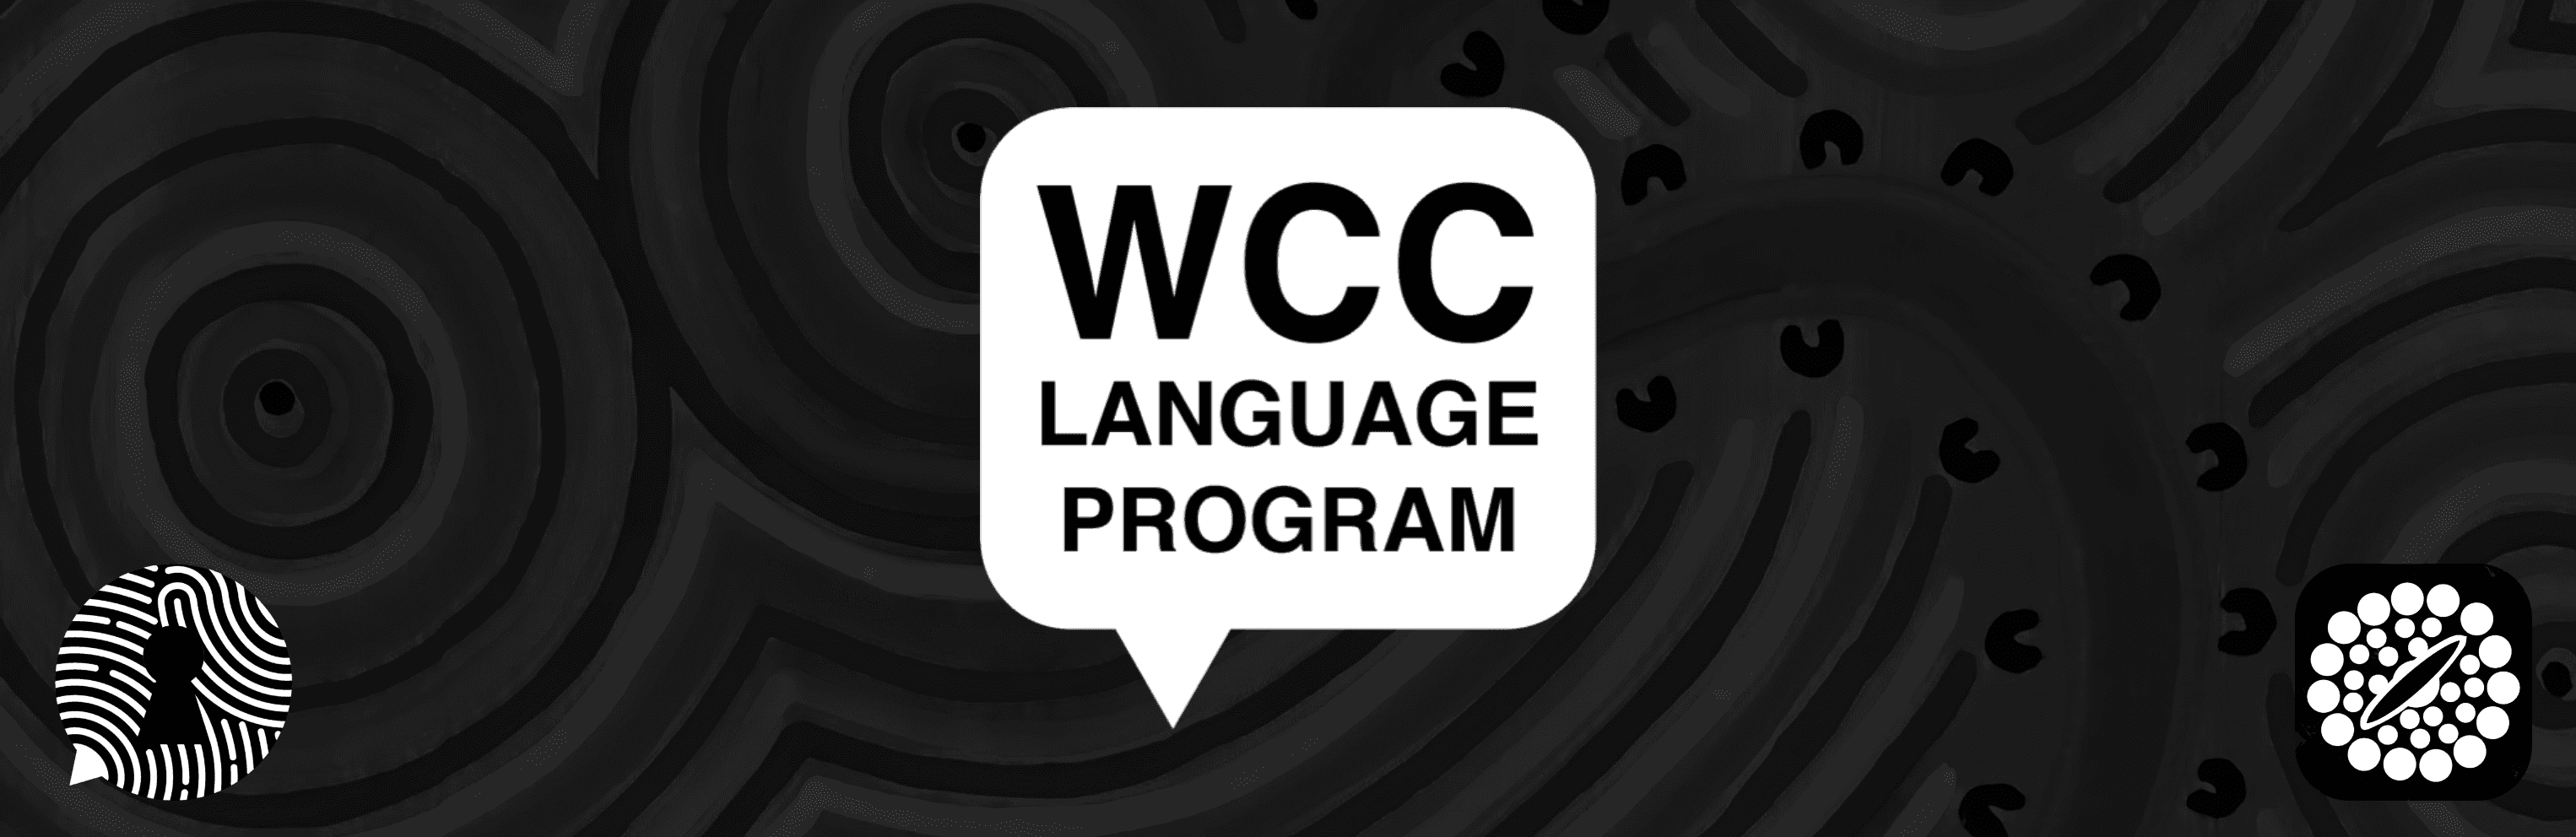 Illustration promoting the WCCLP apps and brands